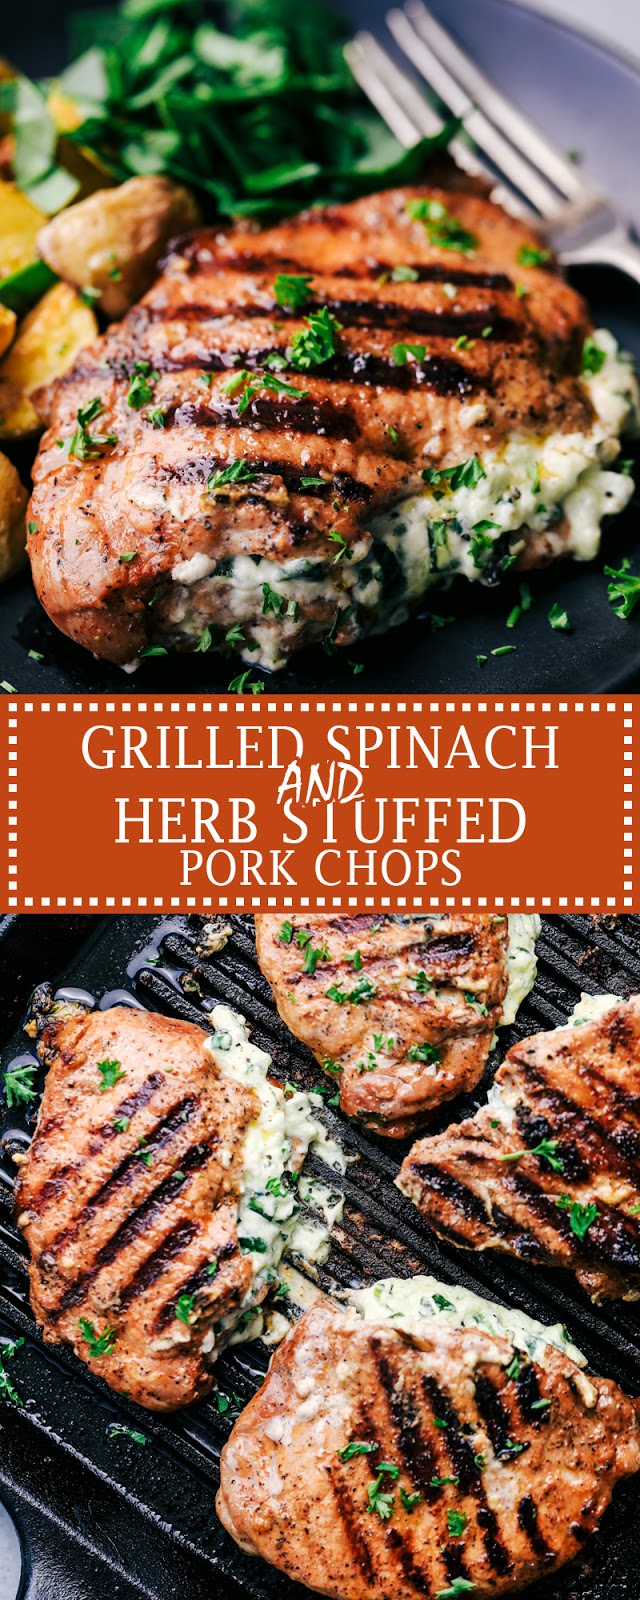 GRILLED SPINACH AND HERB STUFFED PORK CHOPS